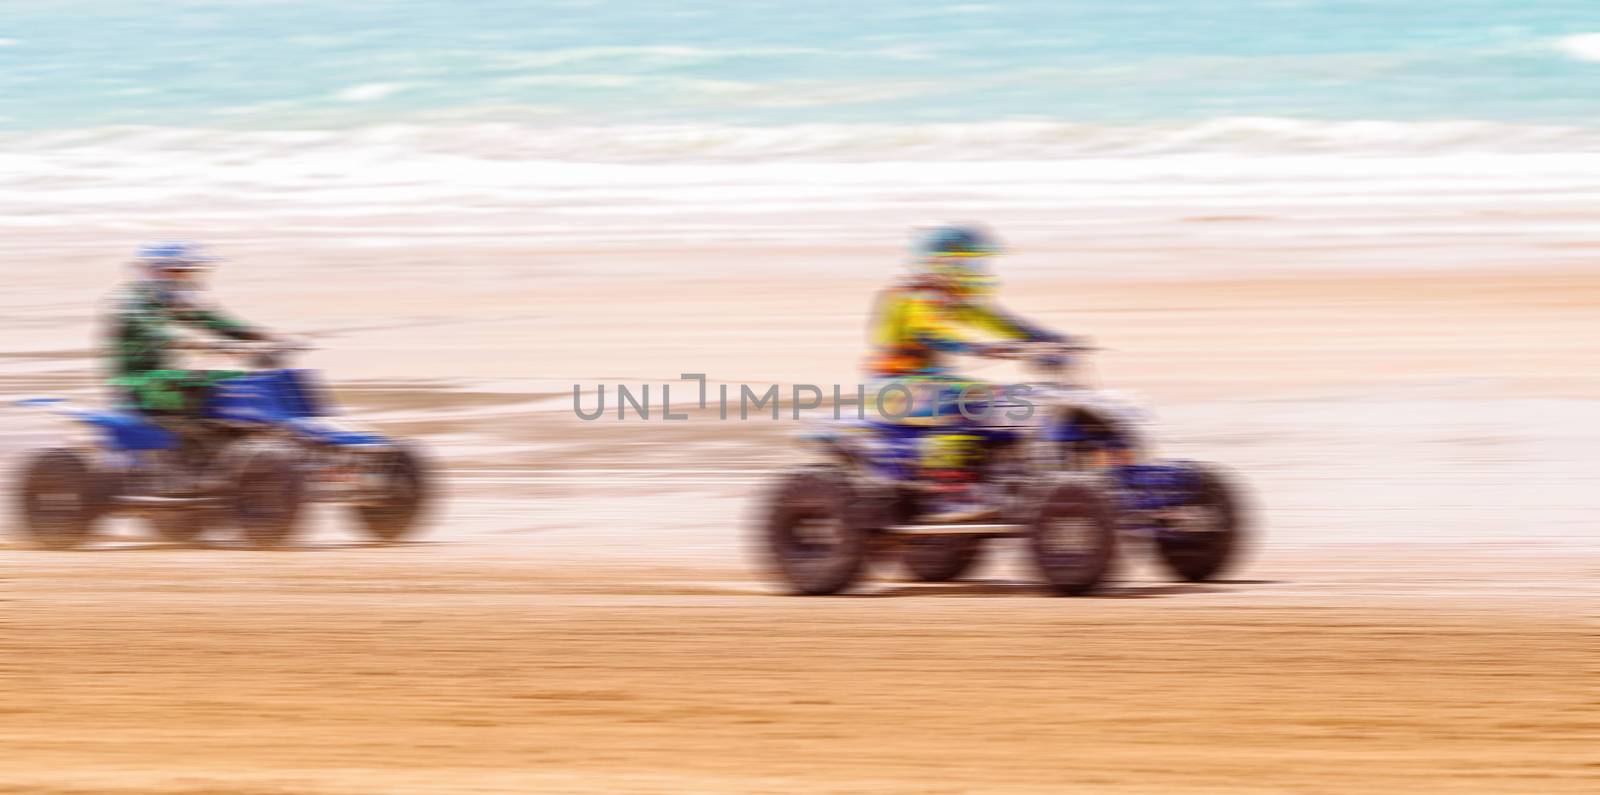 Panning Beach Motorbike Racing To Show Speed Motion by 	JacksonStock